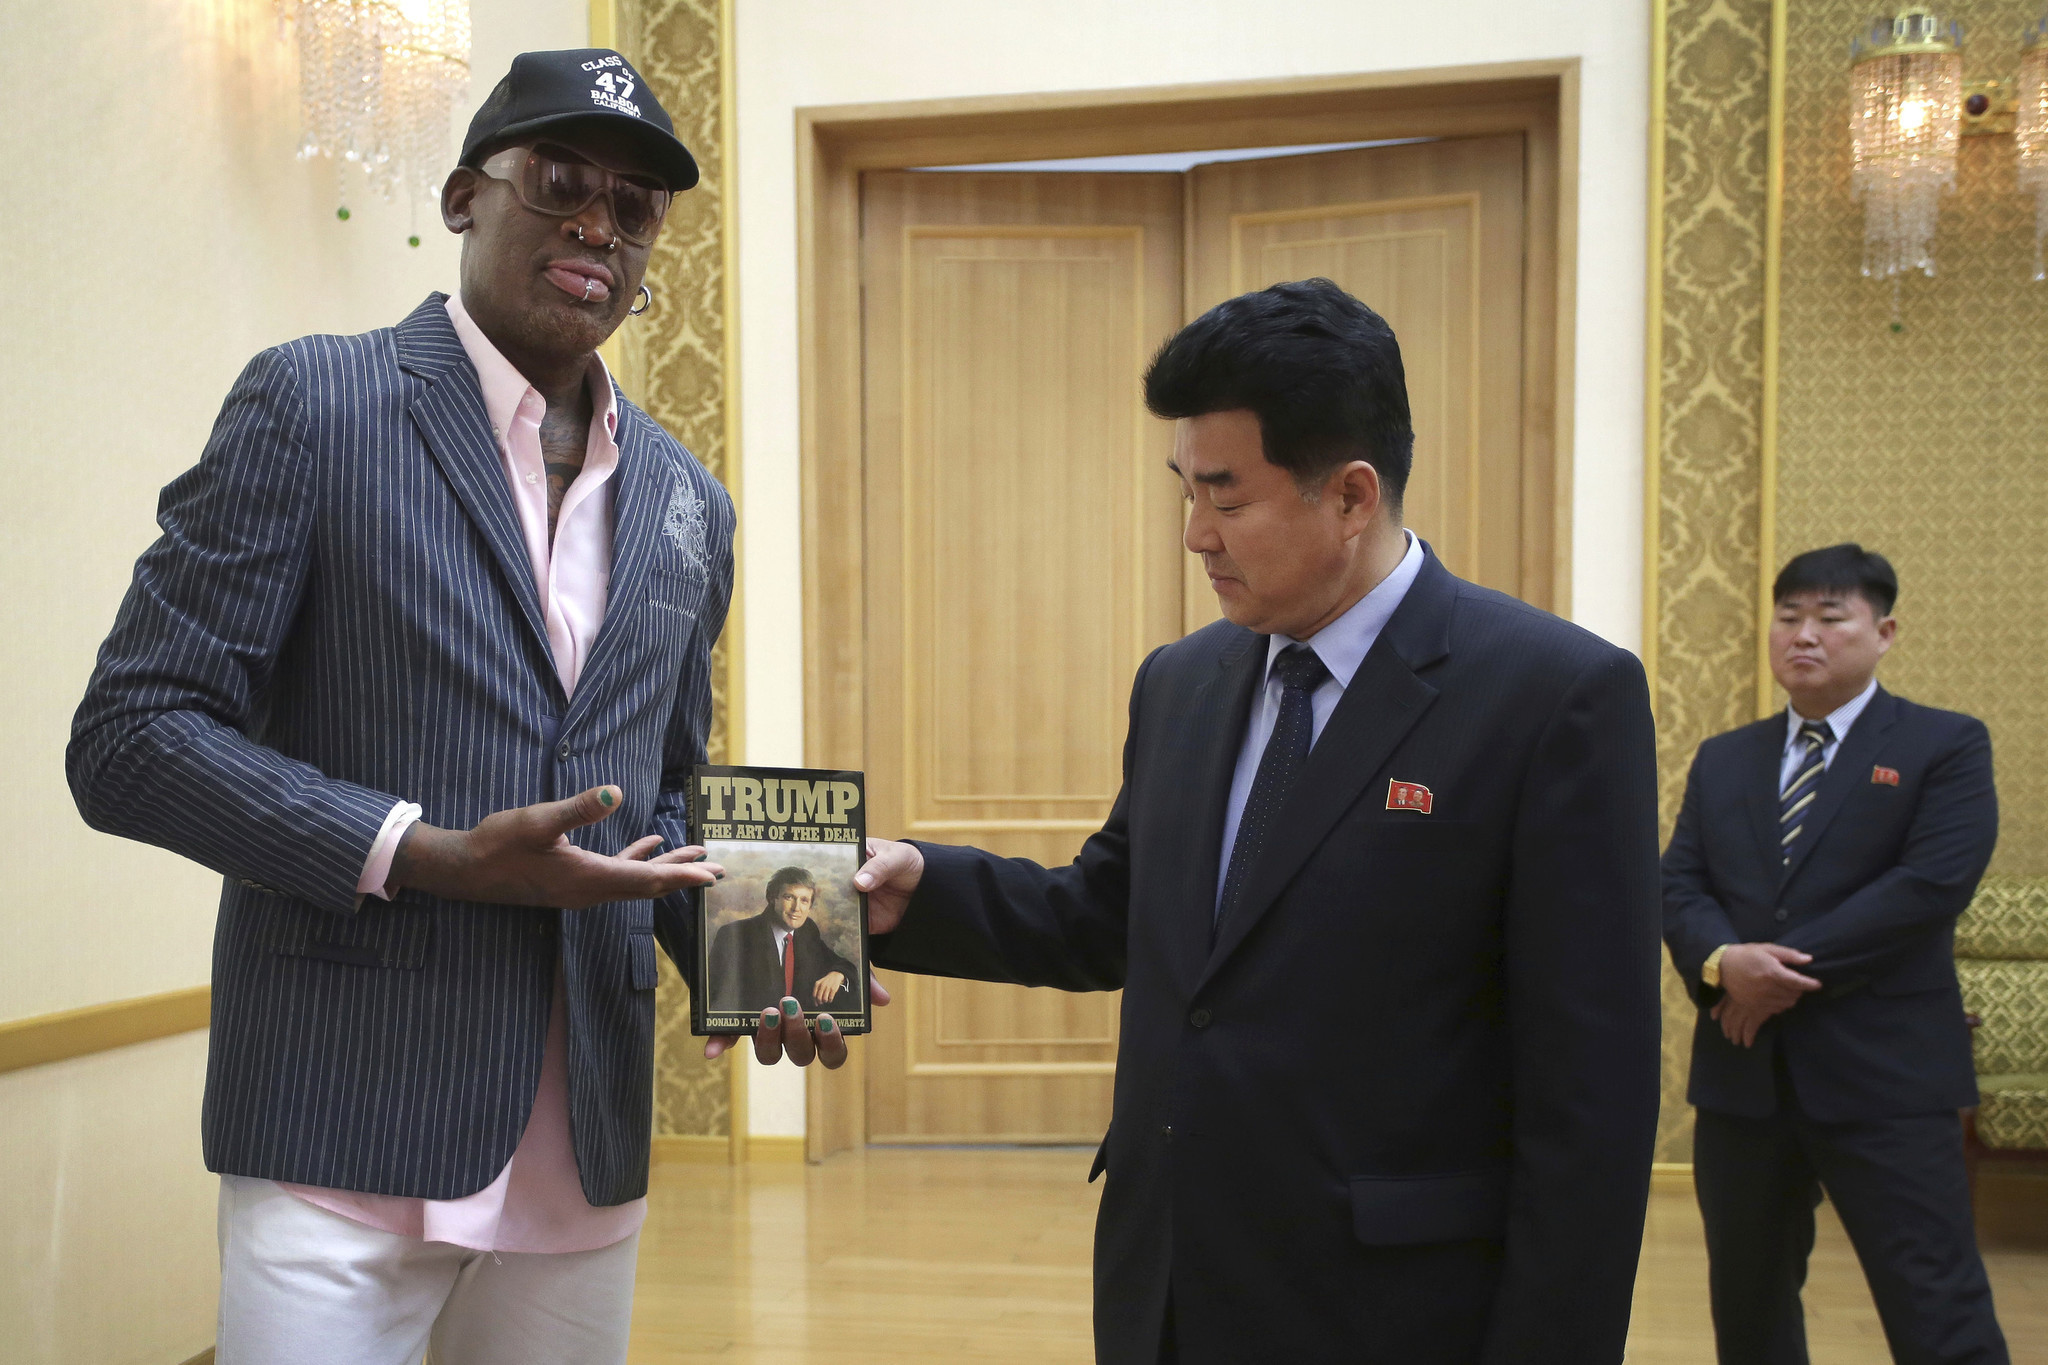 Dennis Rodman target of human rights group's effort to kick him out of Hall of Fame